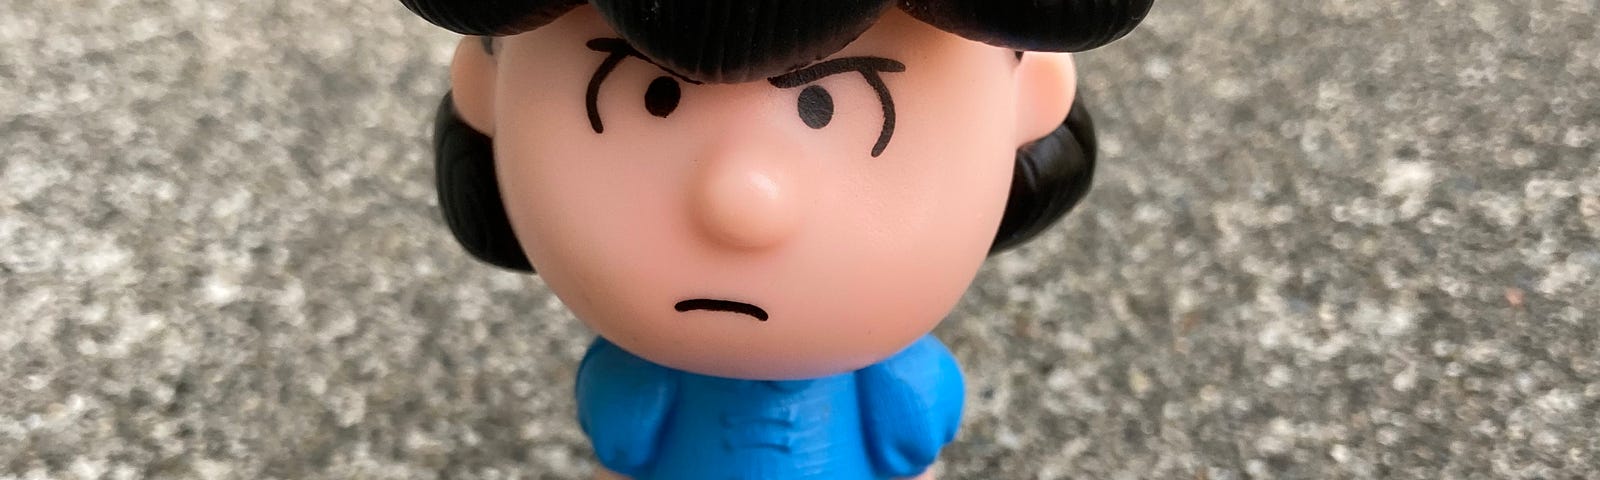 photo of a plastic toy of Lucy Van Pelt from Peanuts comics